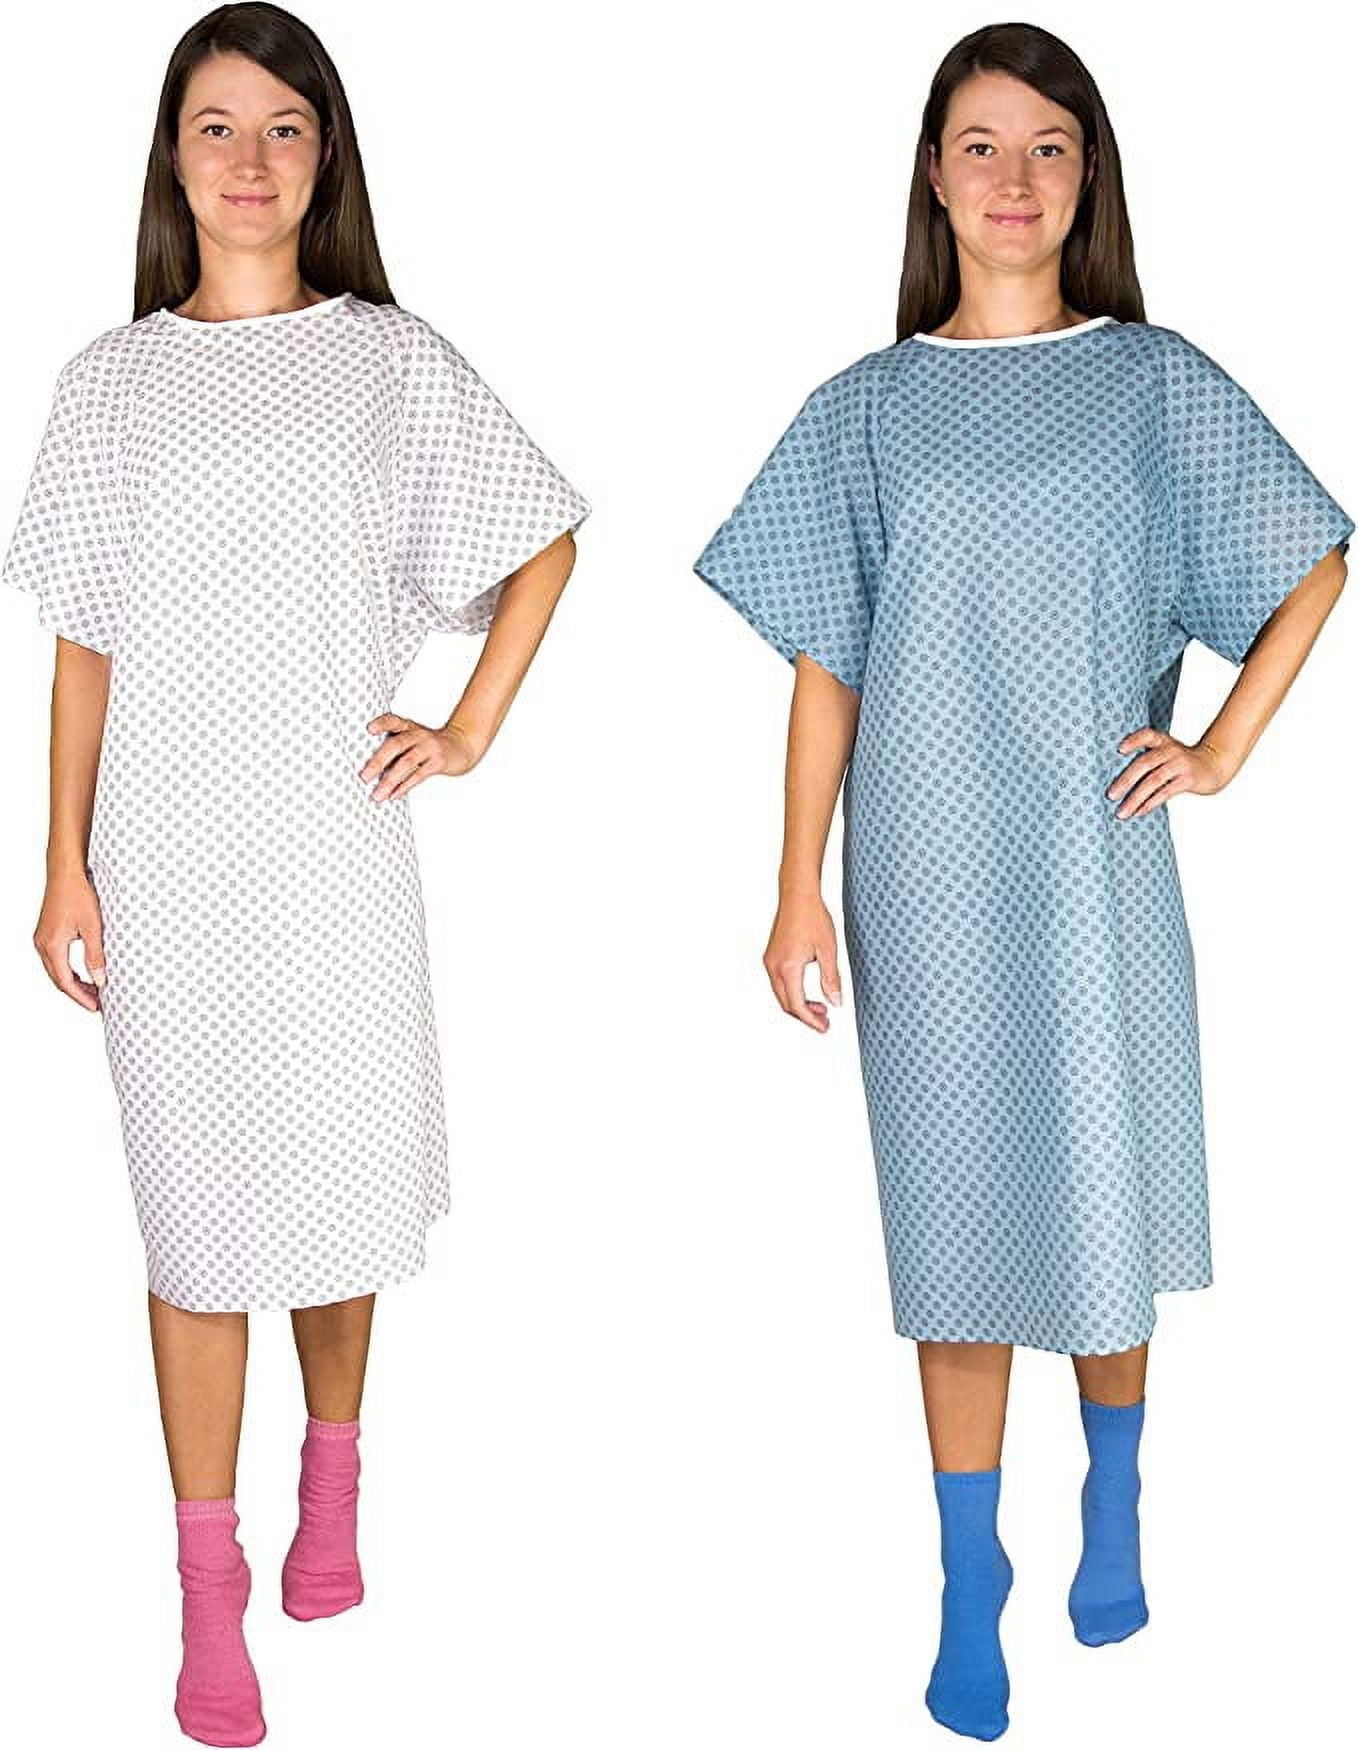 2 Pack Blue and White Hospital Gown with Back Tie One Size Fits All 83c6774b 6f6b 48a0 9a46 5fd4c4896715.13d1b207c3a98687522ffcef9410e89f